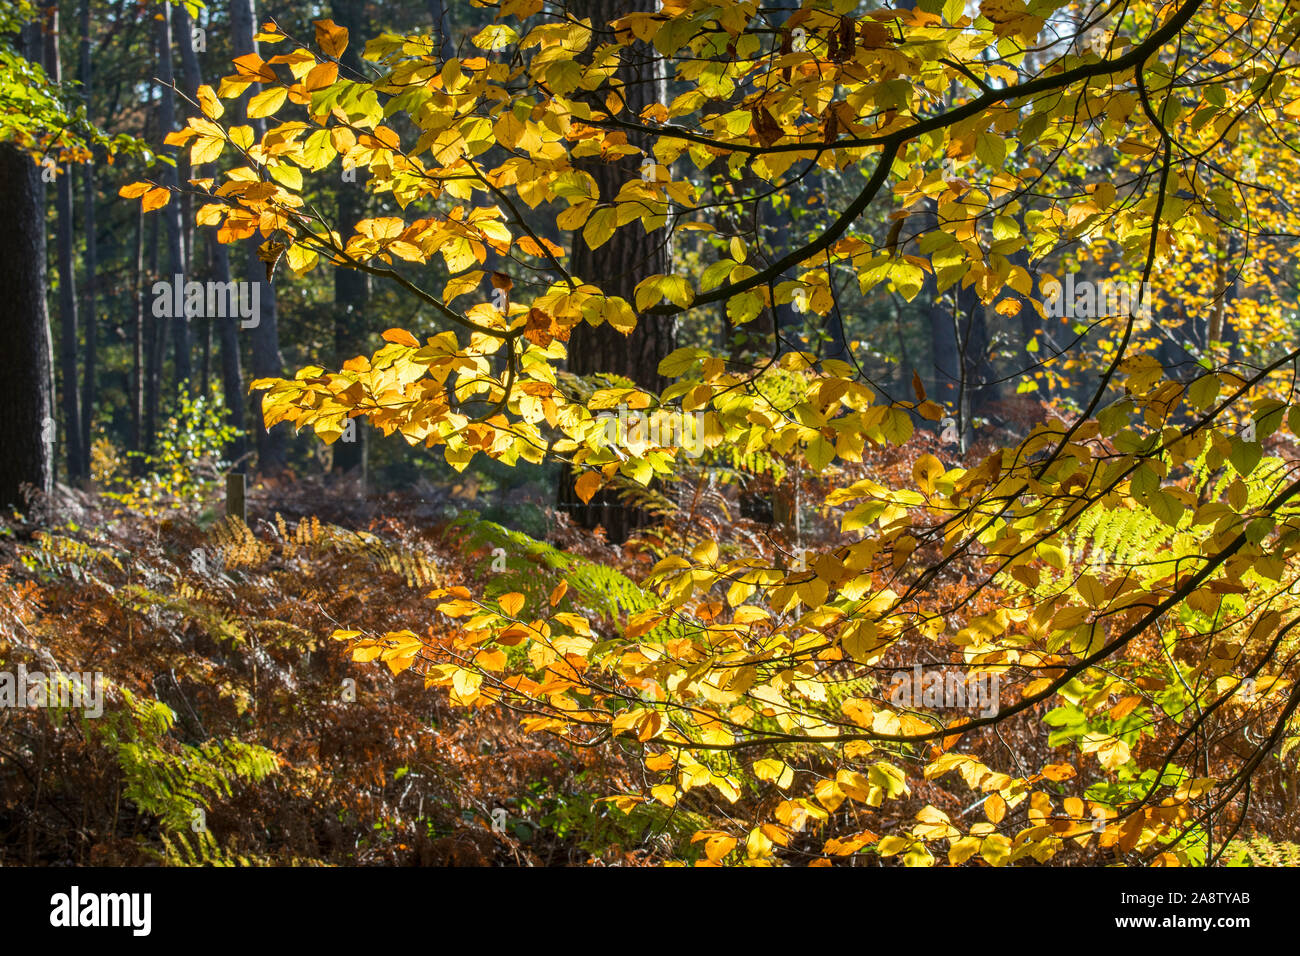 Close up of European beech / common beech (Fagus sylvatica) foliage showing leaves in yellow autumn colours in forest in the fall Stock Photo